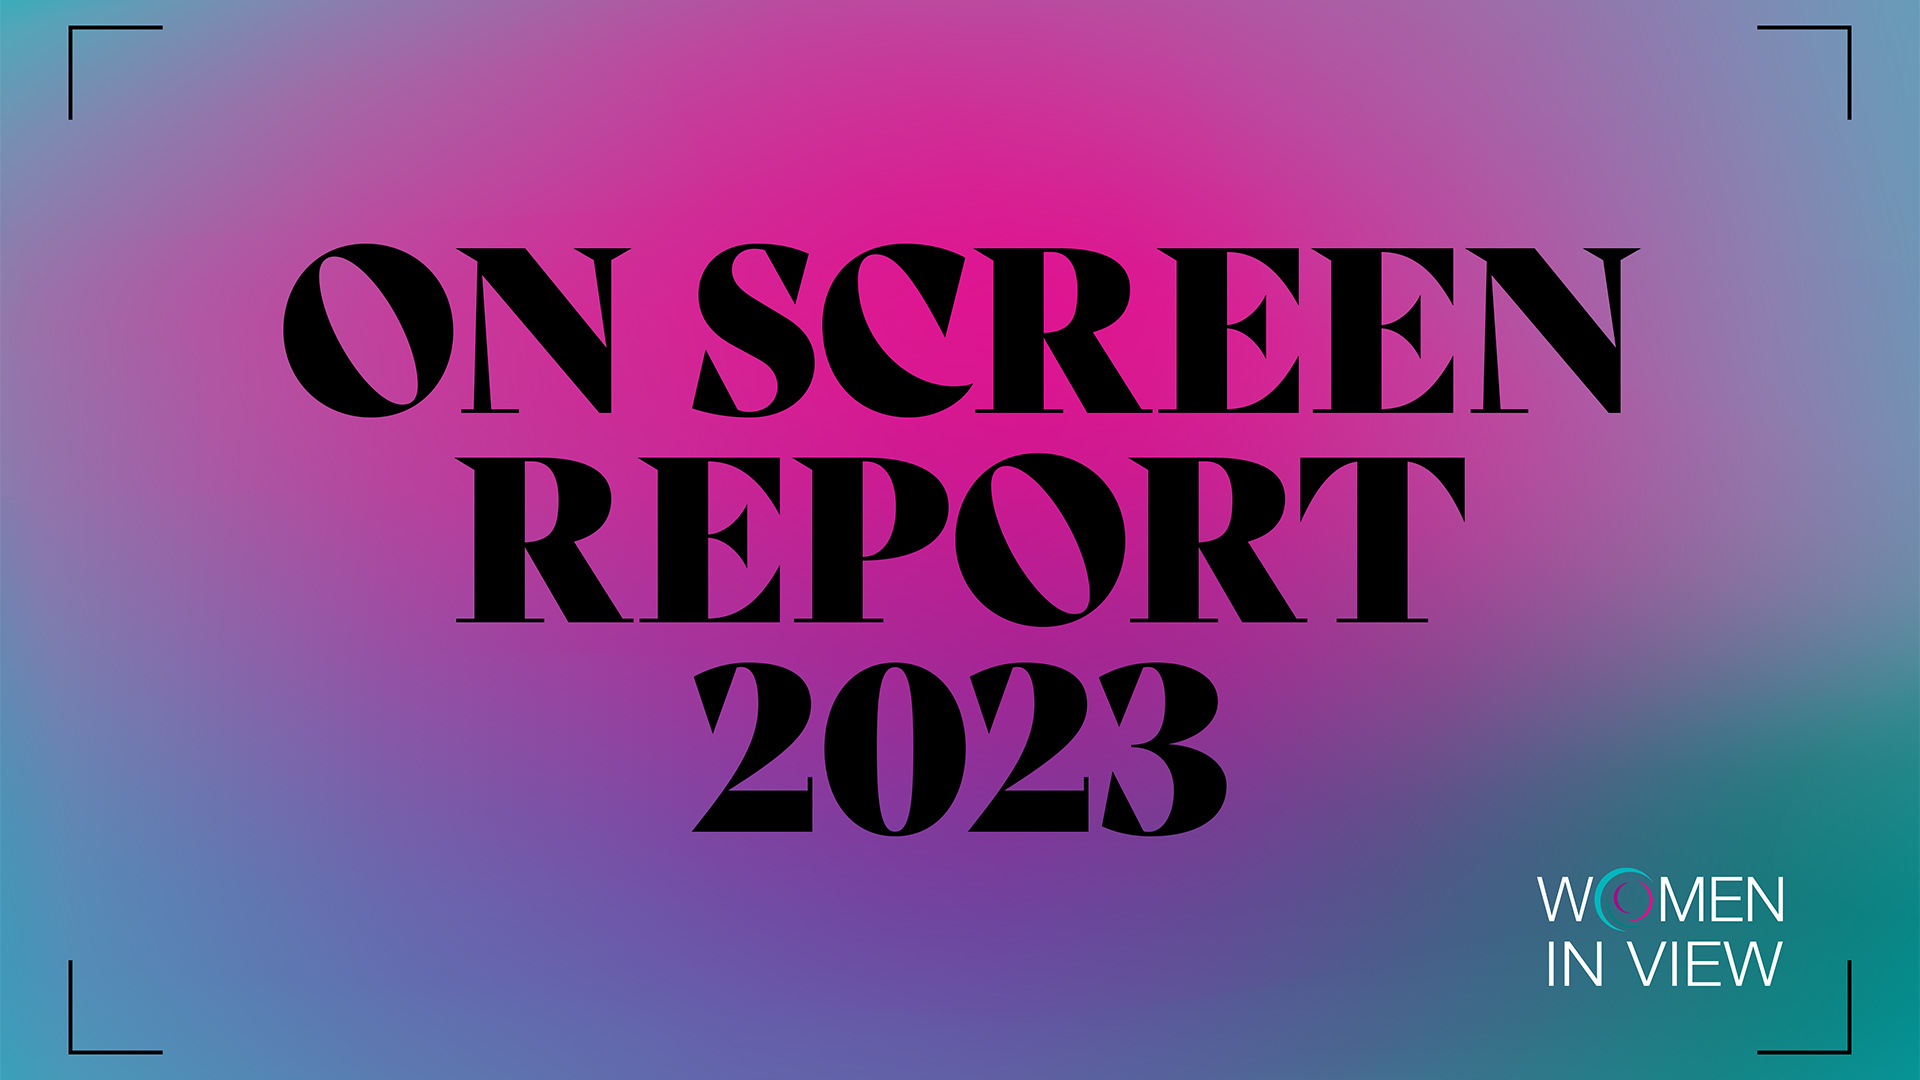 On Screen Report 2023